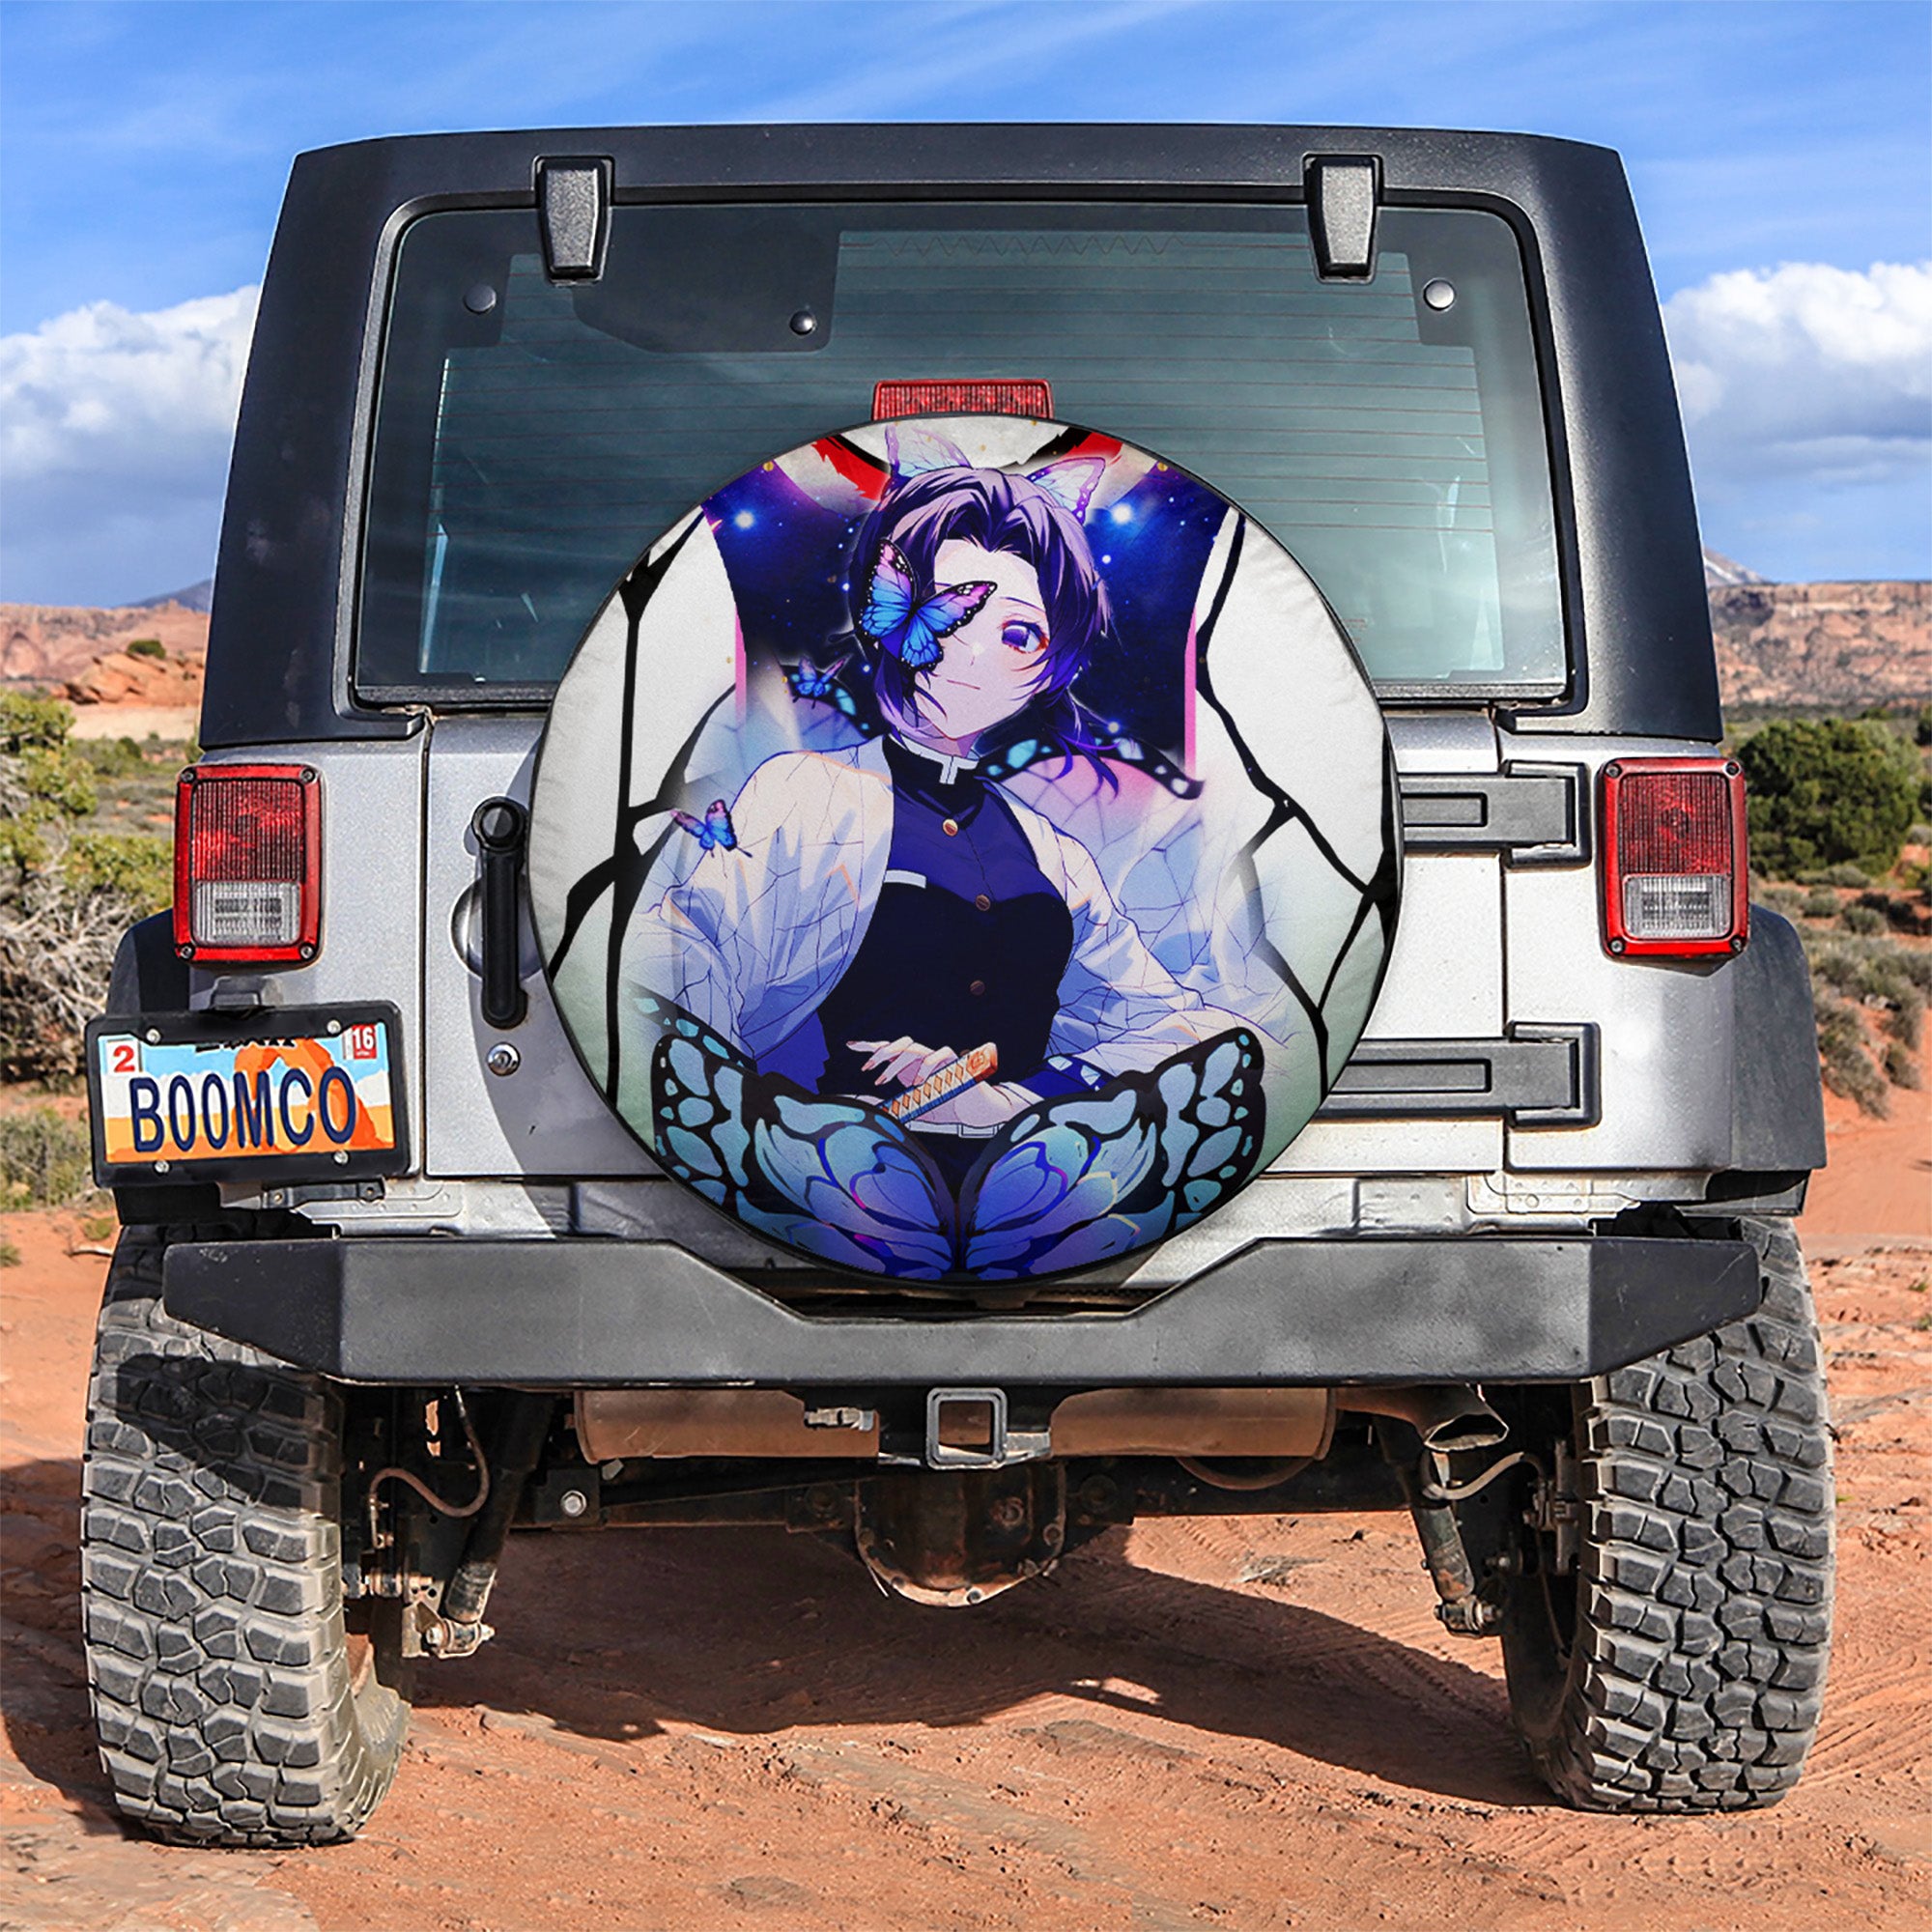 Shinobu Sky Demon Slayer Butterfly Car Spare Tire Covers Gift For Campers Nearkii